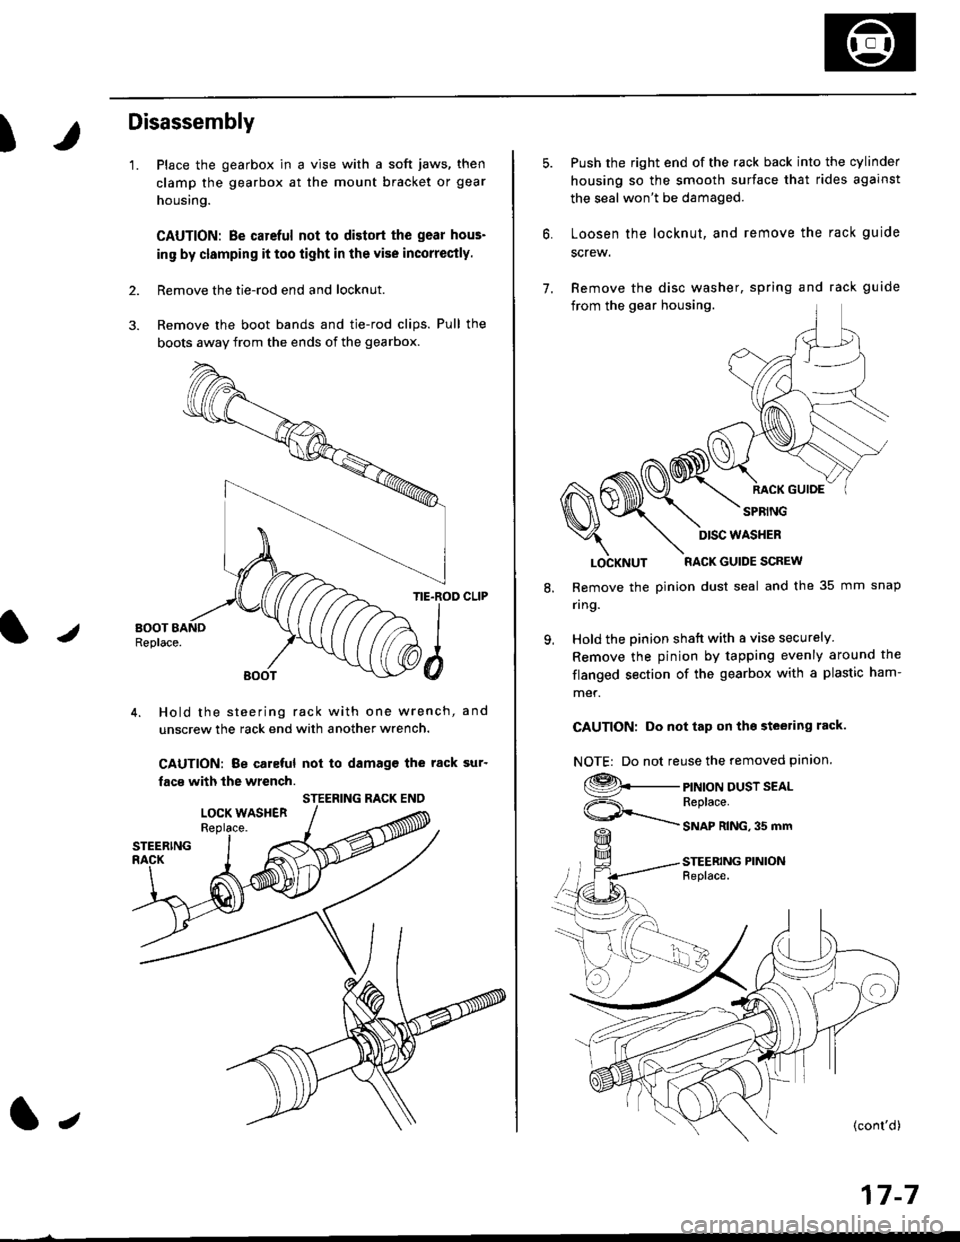 HONDA CIVIC 1996 6.G Workshop Manual )
Disassembly
1.
2.
Place the gearbox in a vise with a soft jaws, then
clamp the gearbox at the mount bracket or gear
housing.
CAUTION: Be carcful not to distort the gear hous-
in9 by clamping it too